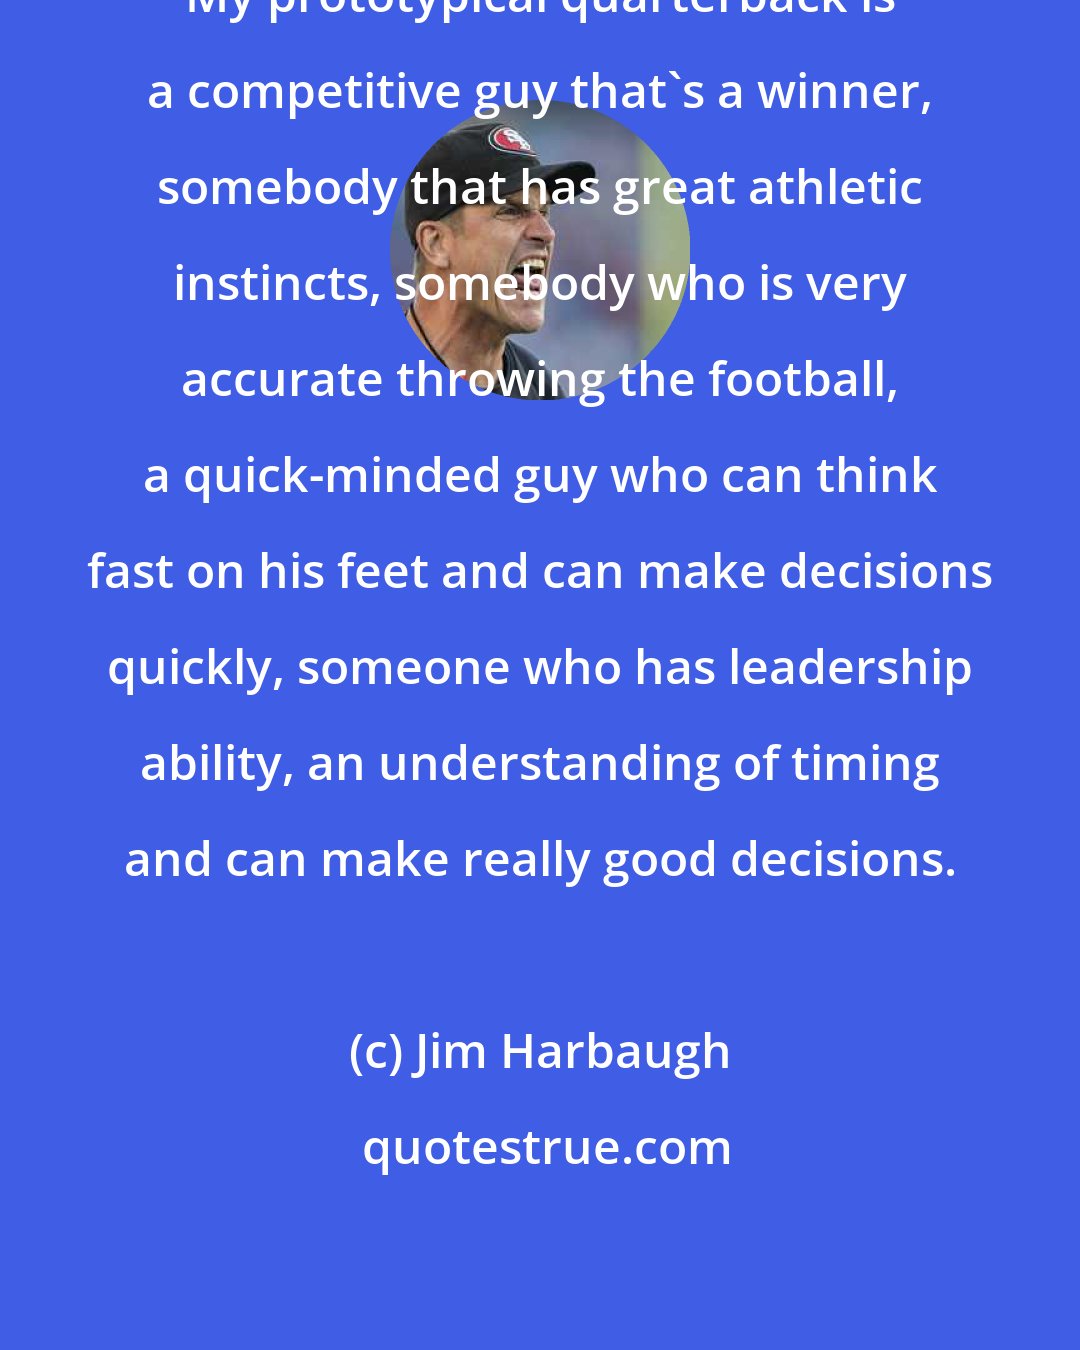 Jim Harbaugh: My prototypical quarterback is a competitive guy that's a winner, somebody that has great athletic instincts, somebody who is very accurate throwing the football, a quick-minded guy who can think fast on his feet and can make decisions quickly, someone who has leadership ability, an understanding of timing and can make really good decisions.